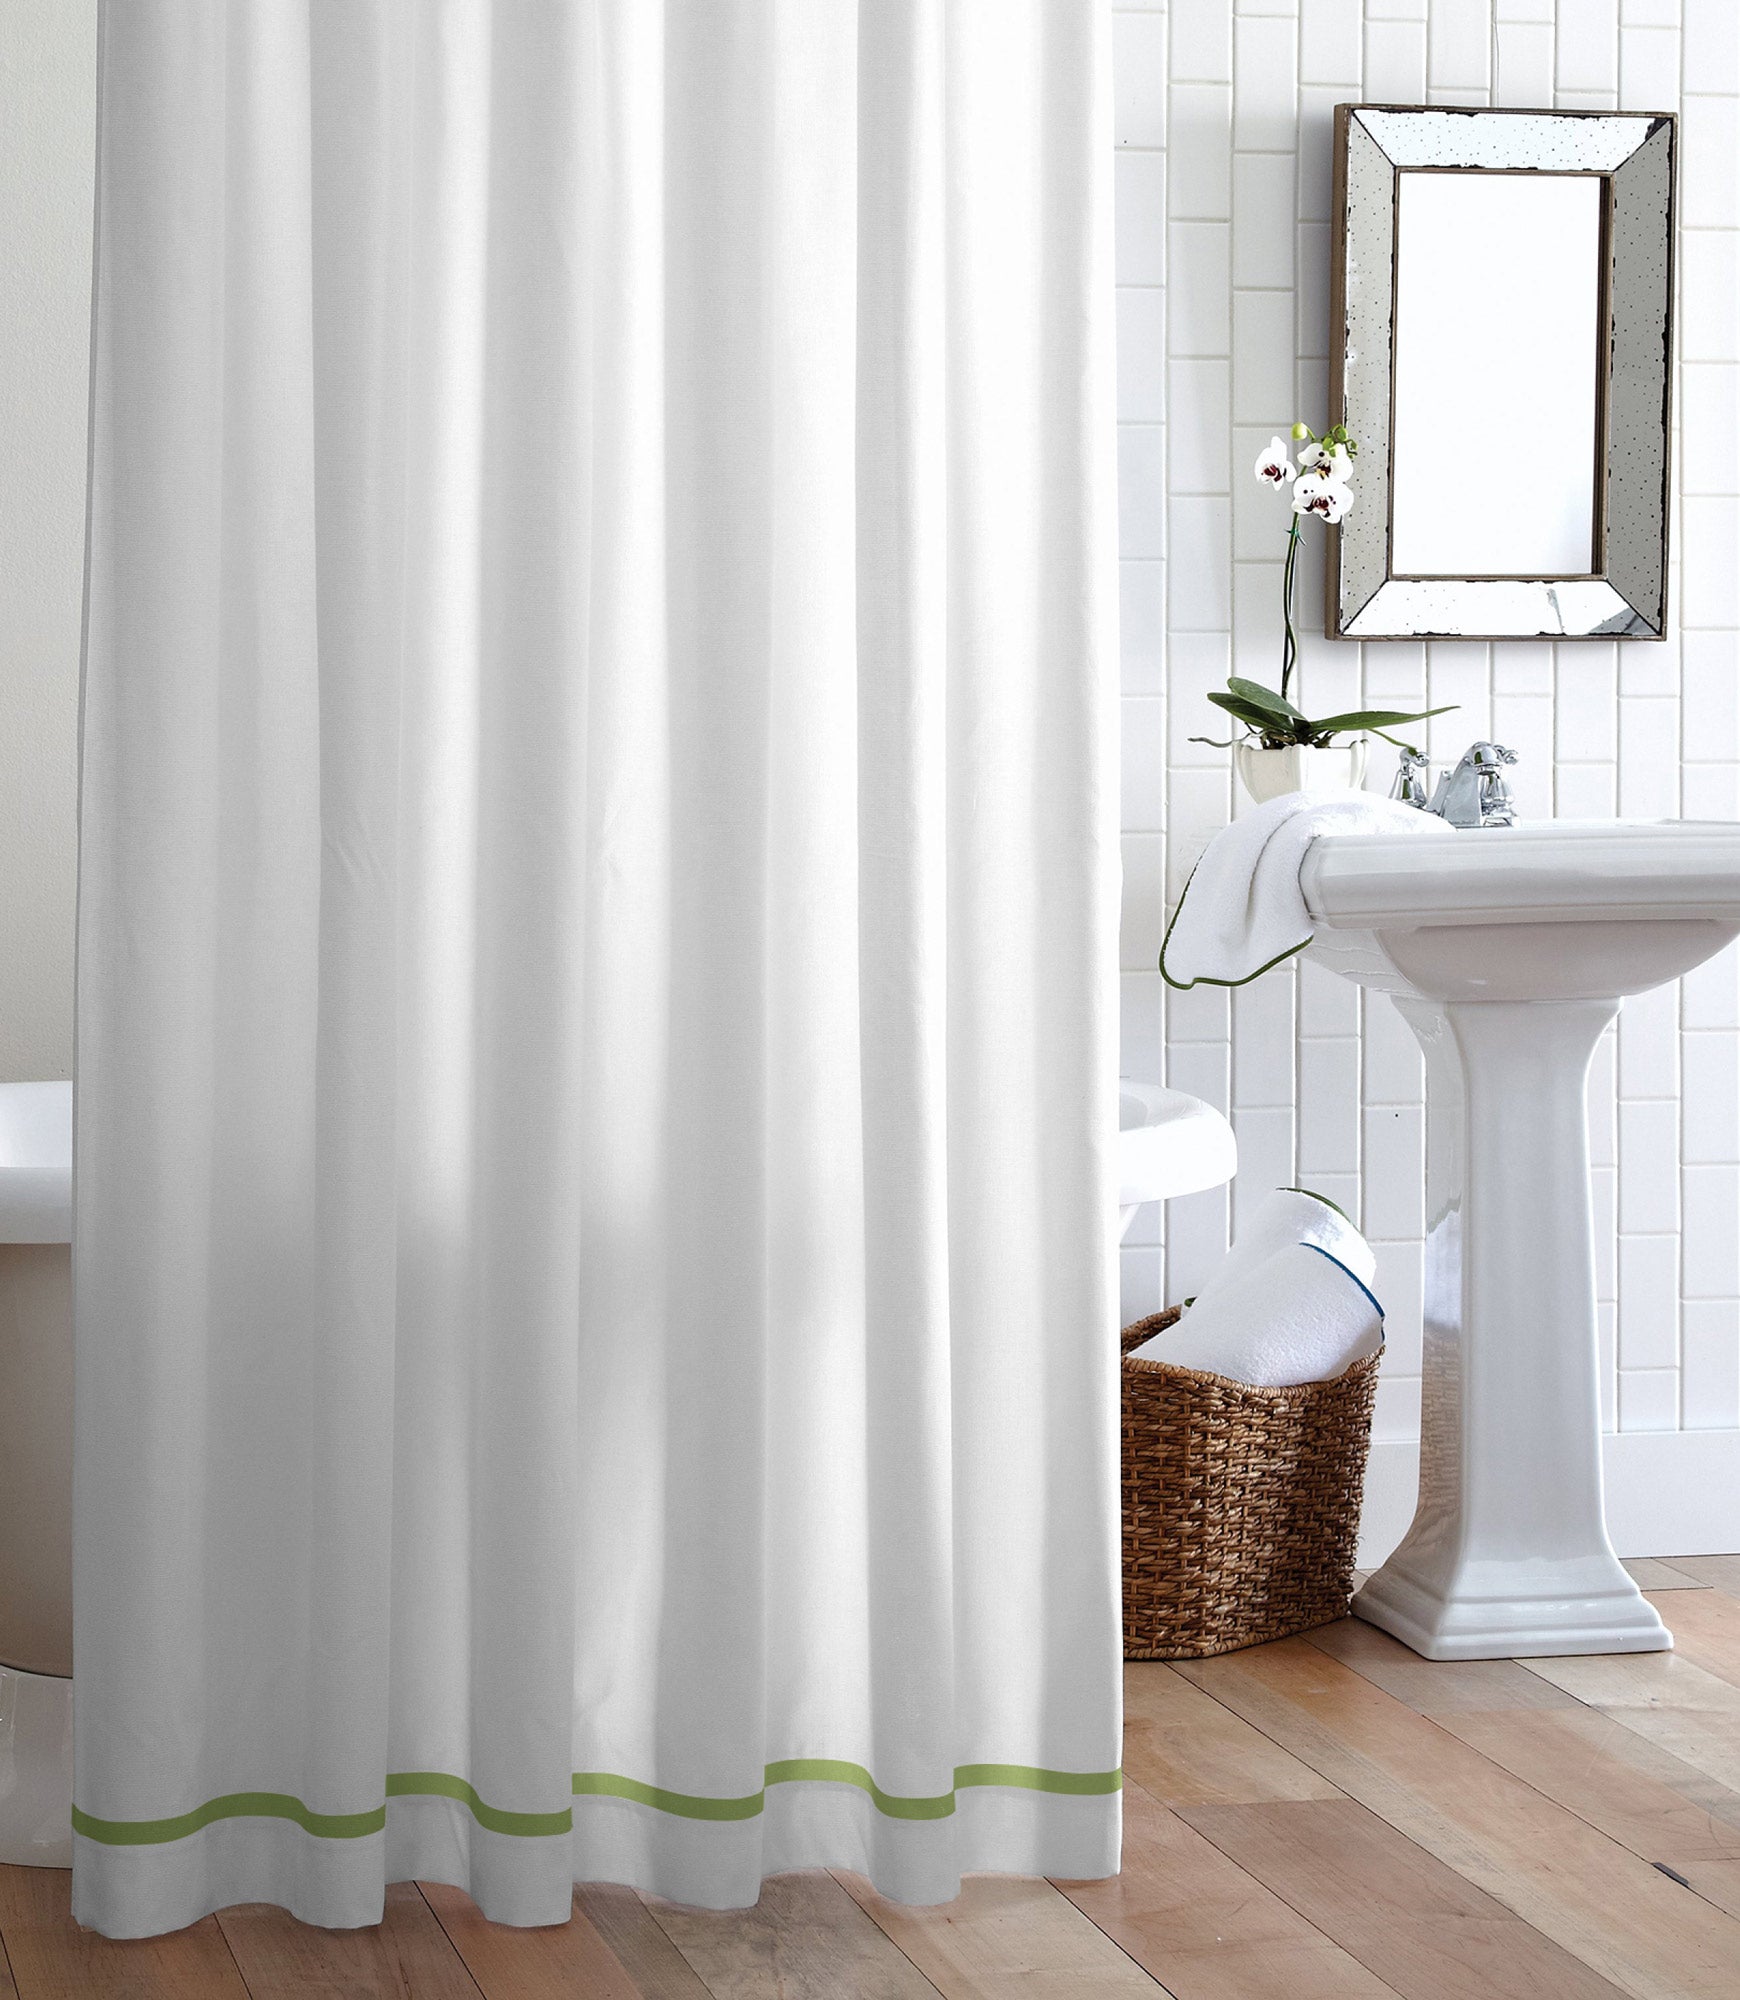 Pique 2 Tailored Shower Curtain Meadow Trim Hanging In Bathroom